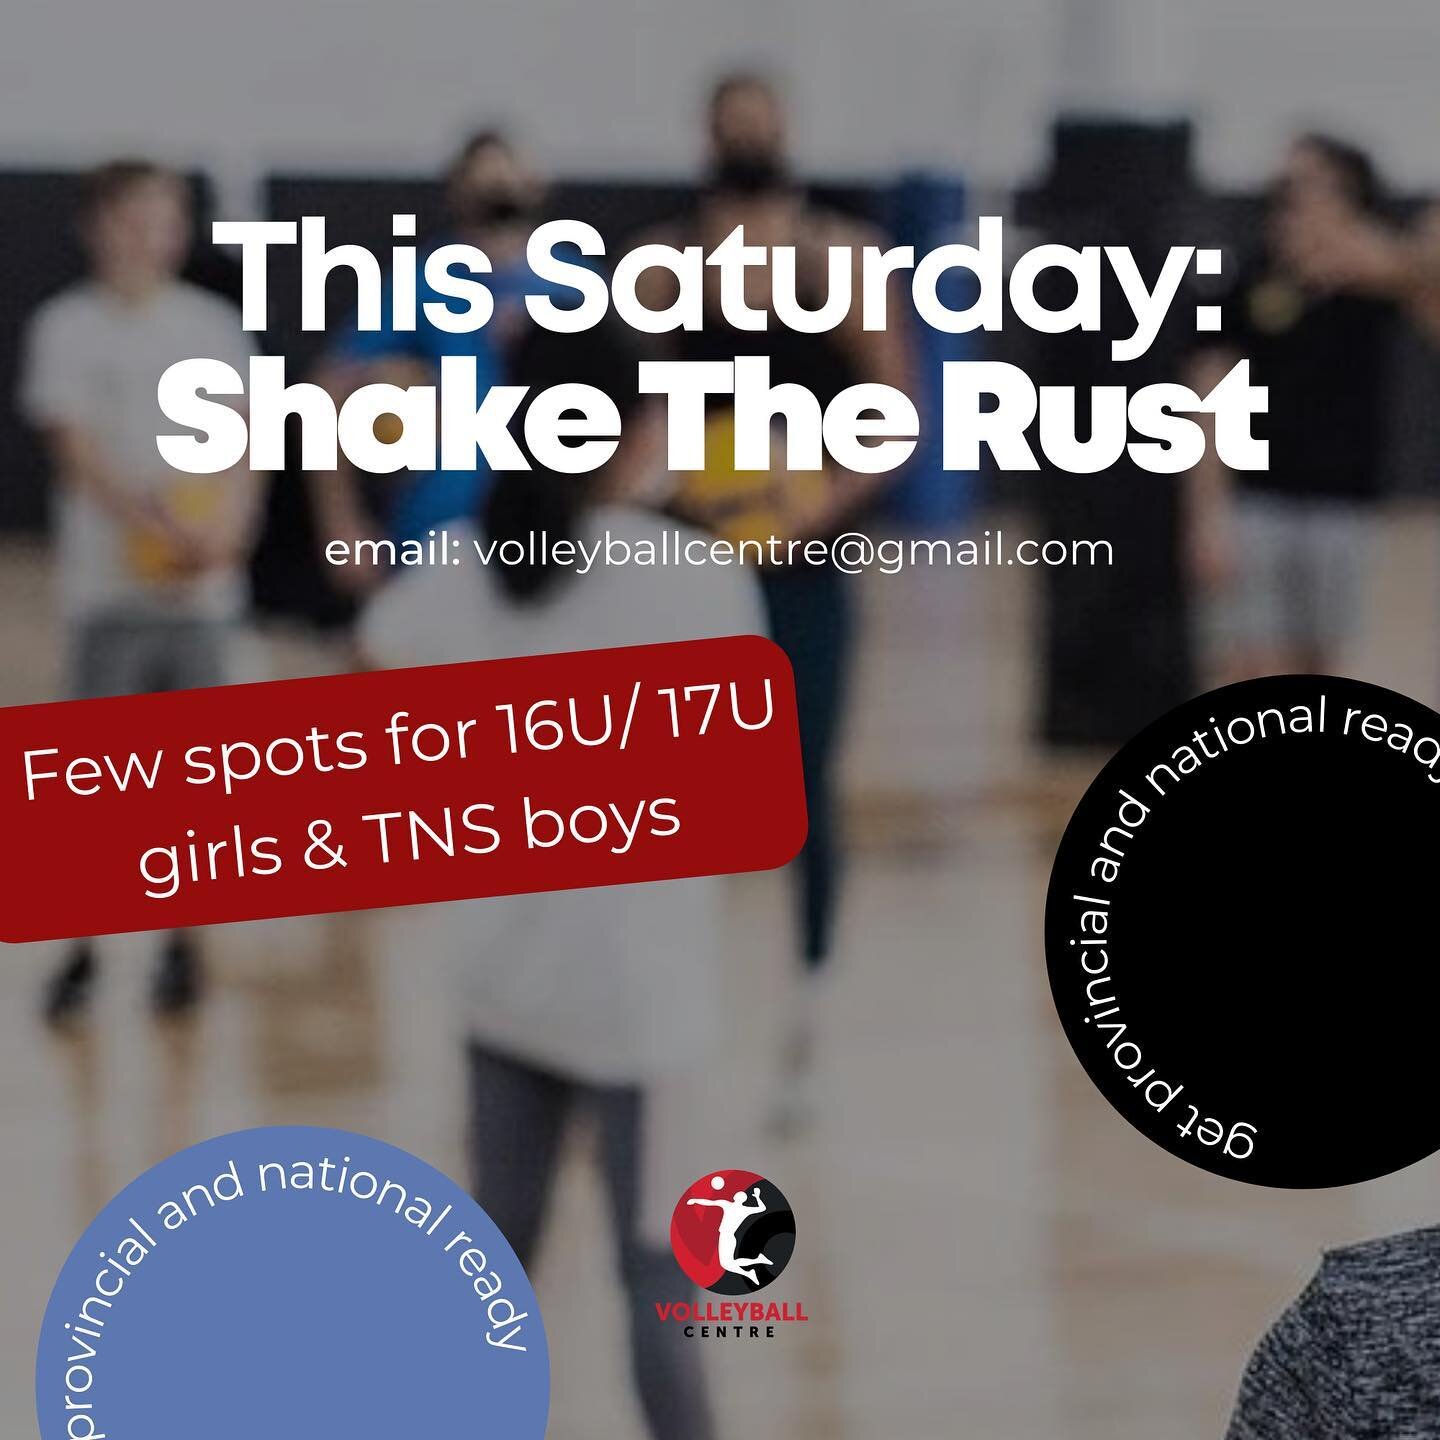 We still have a few spots for 16U/17U girls &amp; TNS boys at our Shake the Rust tournament happening THIS Saturday! Get provincials and nationals ready through our series of competitions happening over the month of April and May.